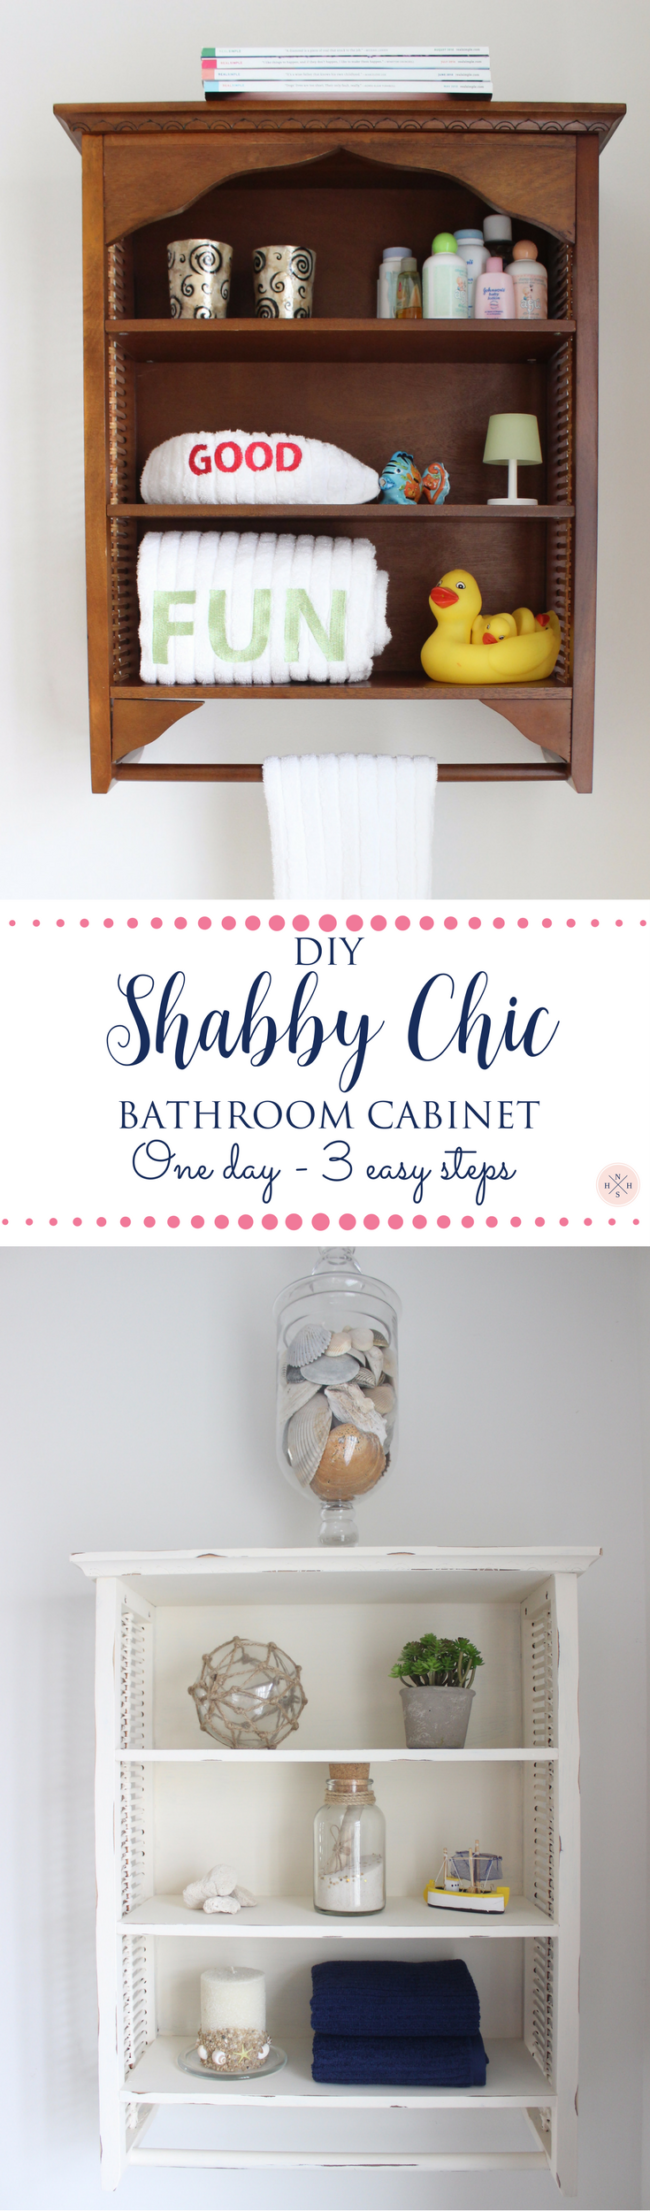 An old over the toilet bathroom cabinet gets a shabby chic makeover in 3 easy steps.